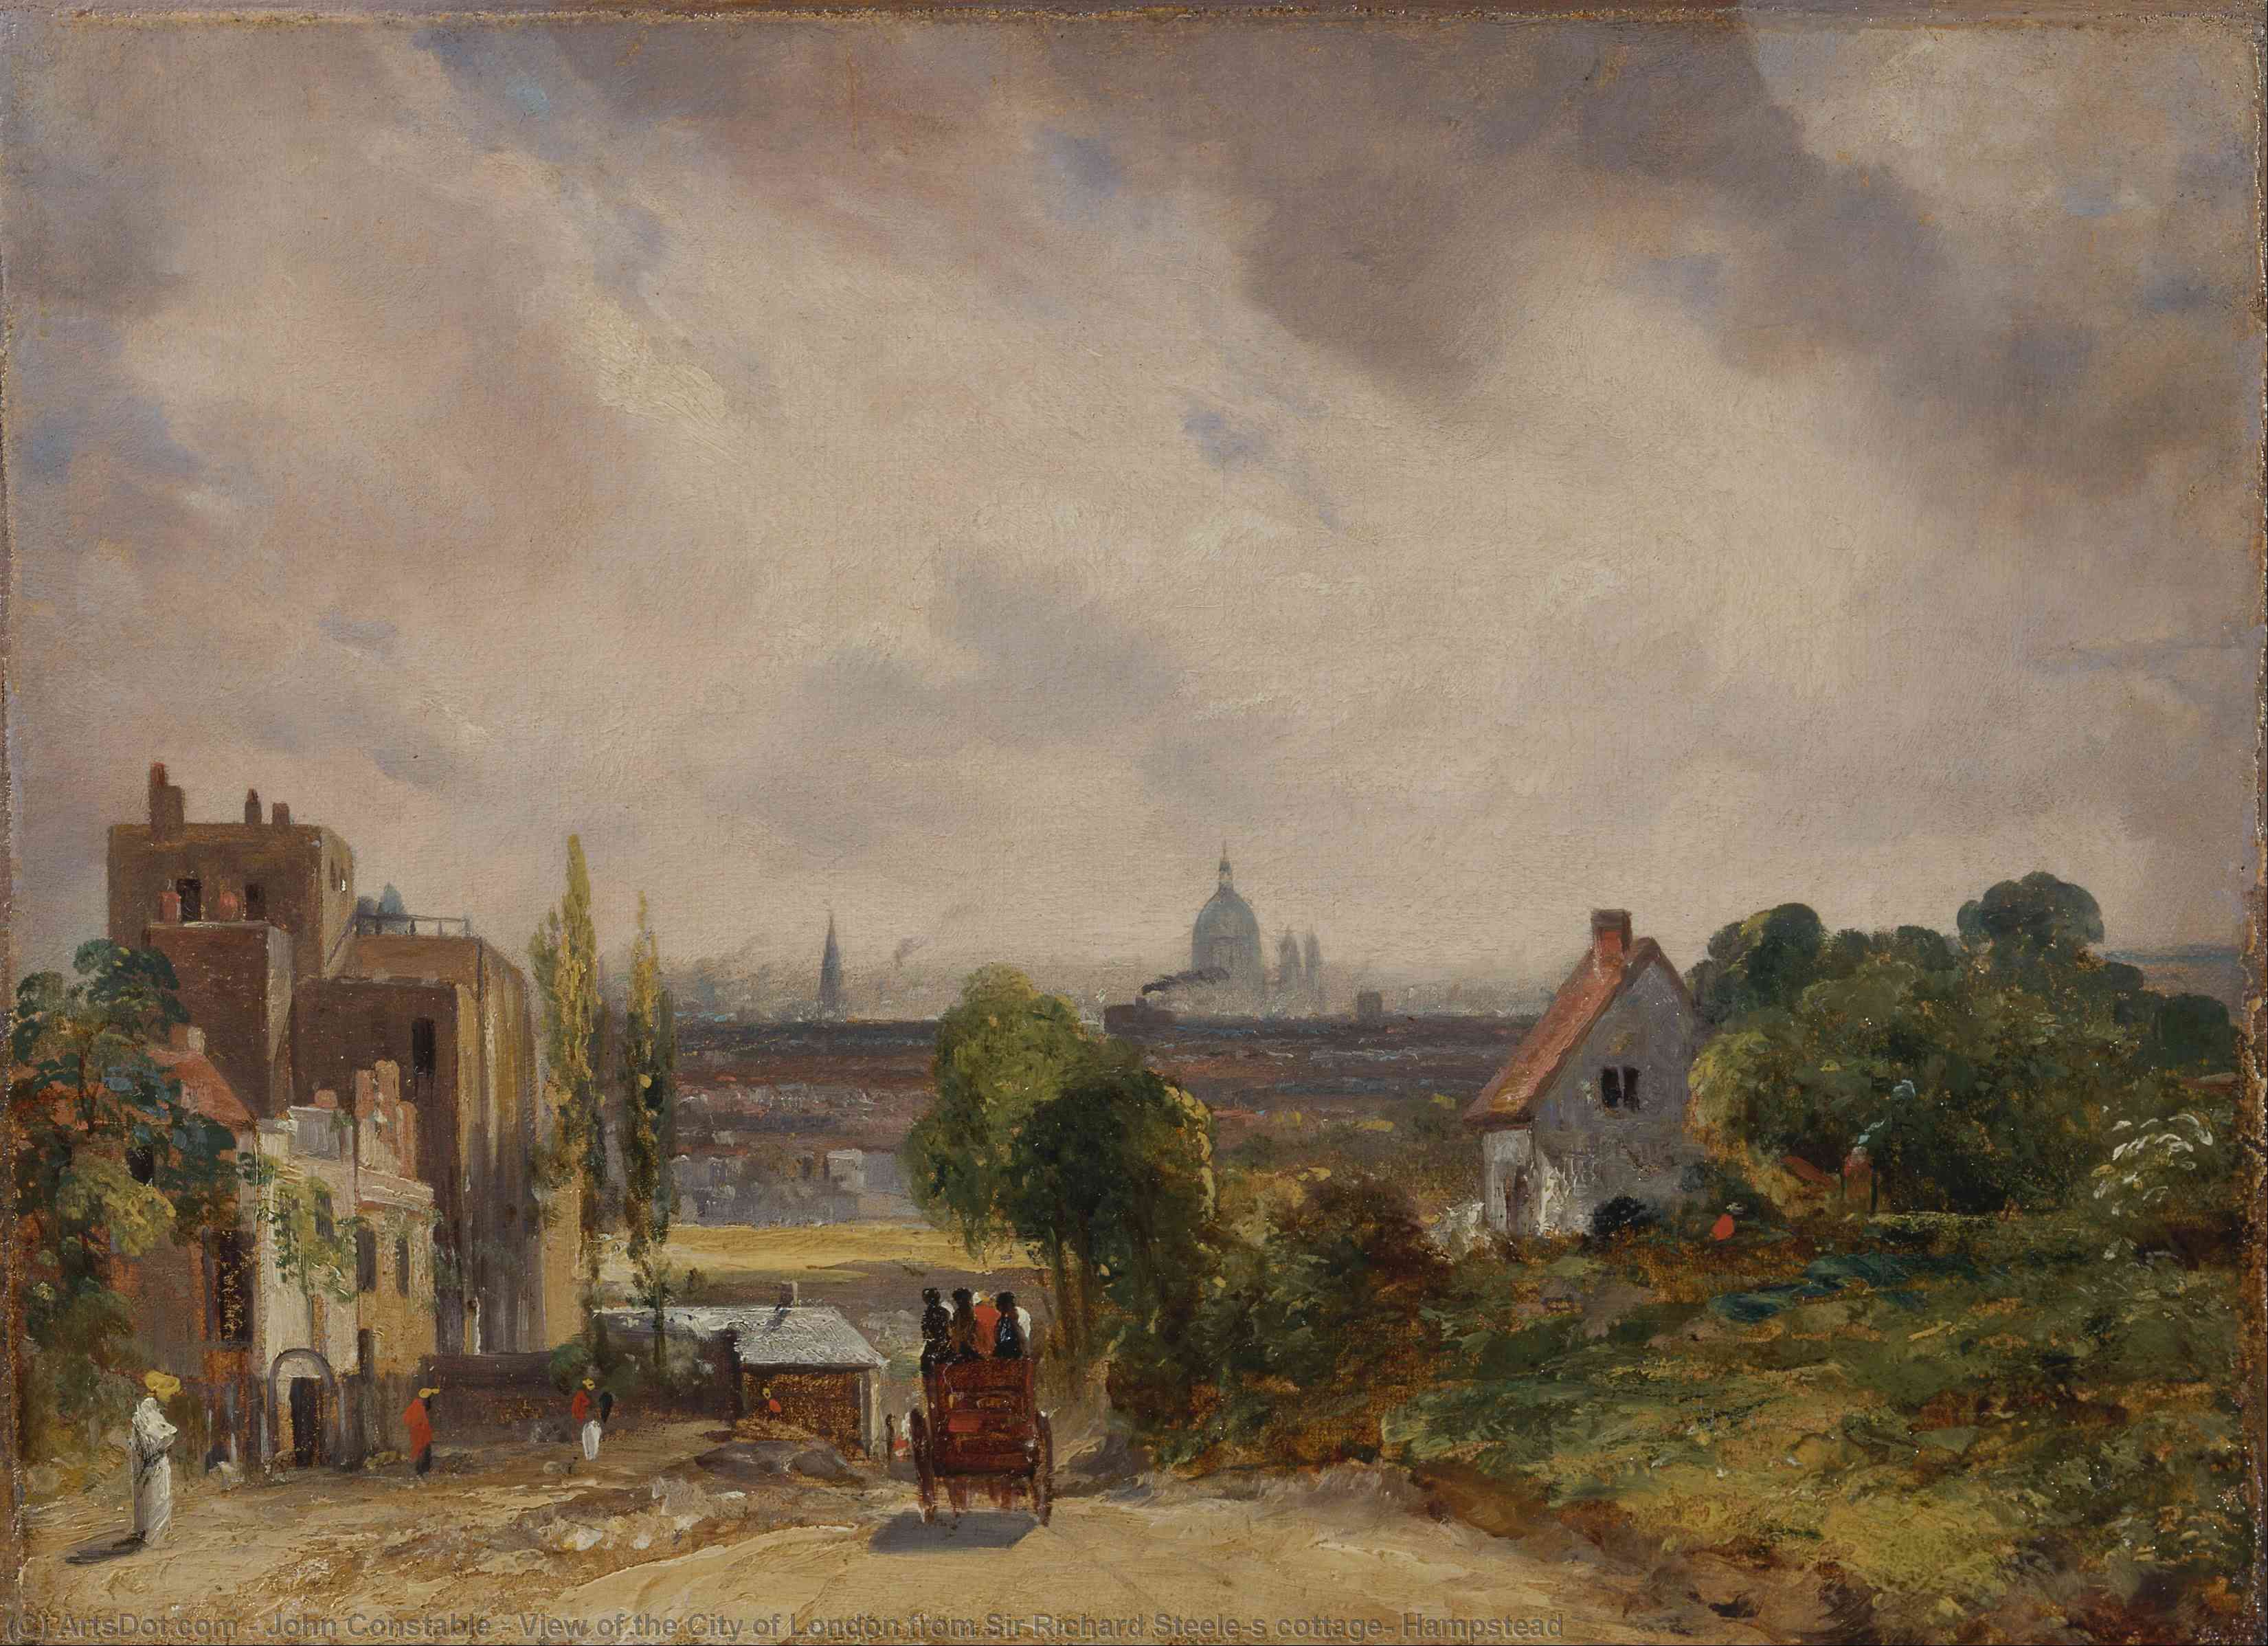 WikiOO.org - Encyclopedia of Fine Arts - Malba, Artwork John Constable - View of the City of London from Sir Richard Steele's cottage, Hampstead